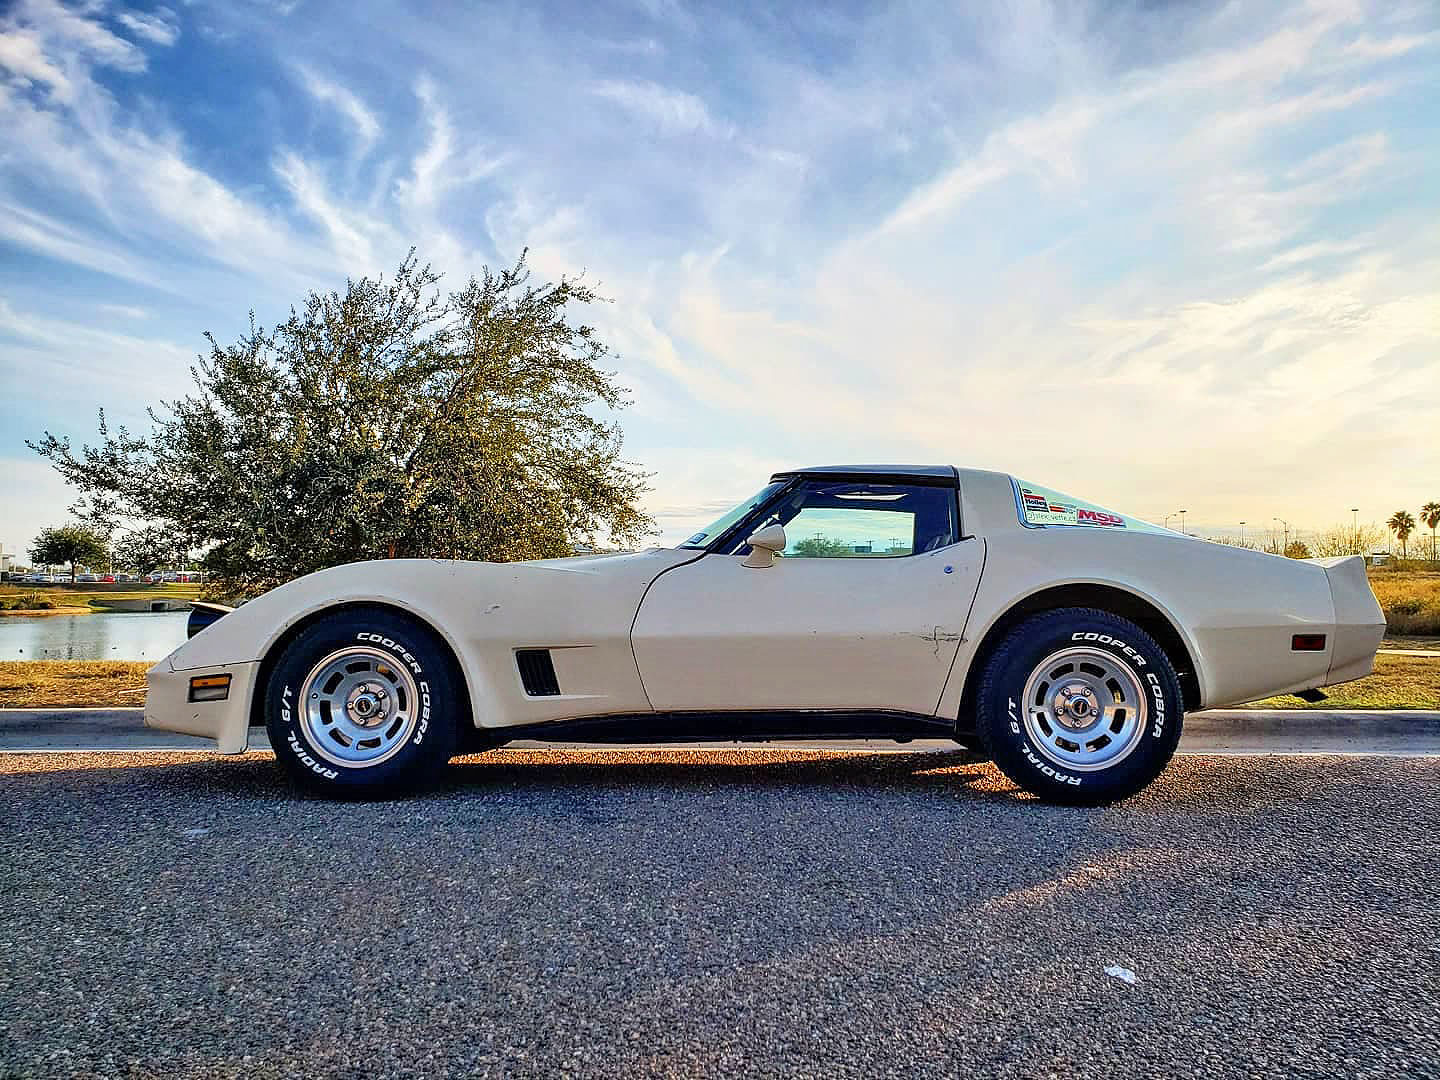 This C3 lives in South Texas where it is a daily driver for a young Corvette enthusiast.